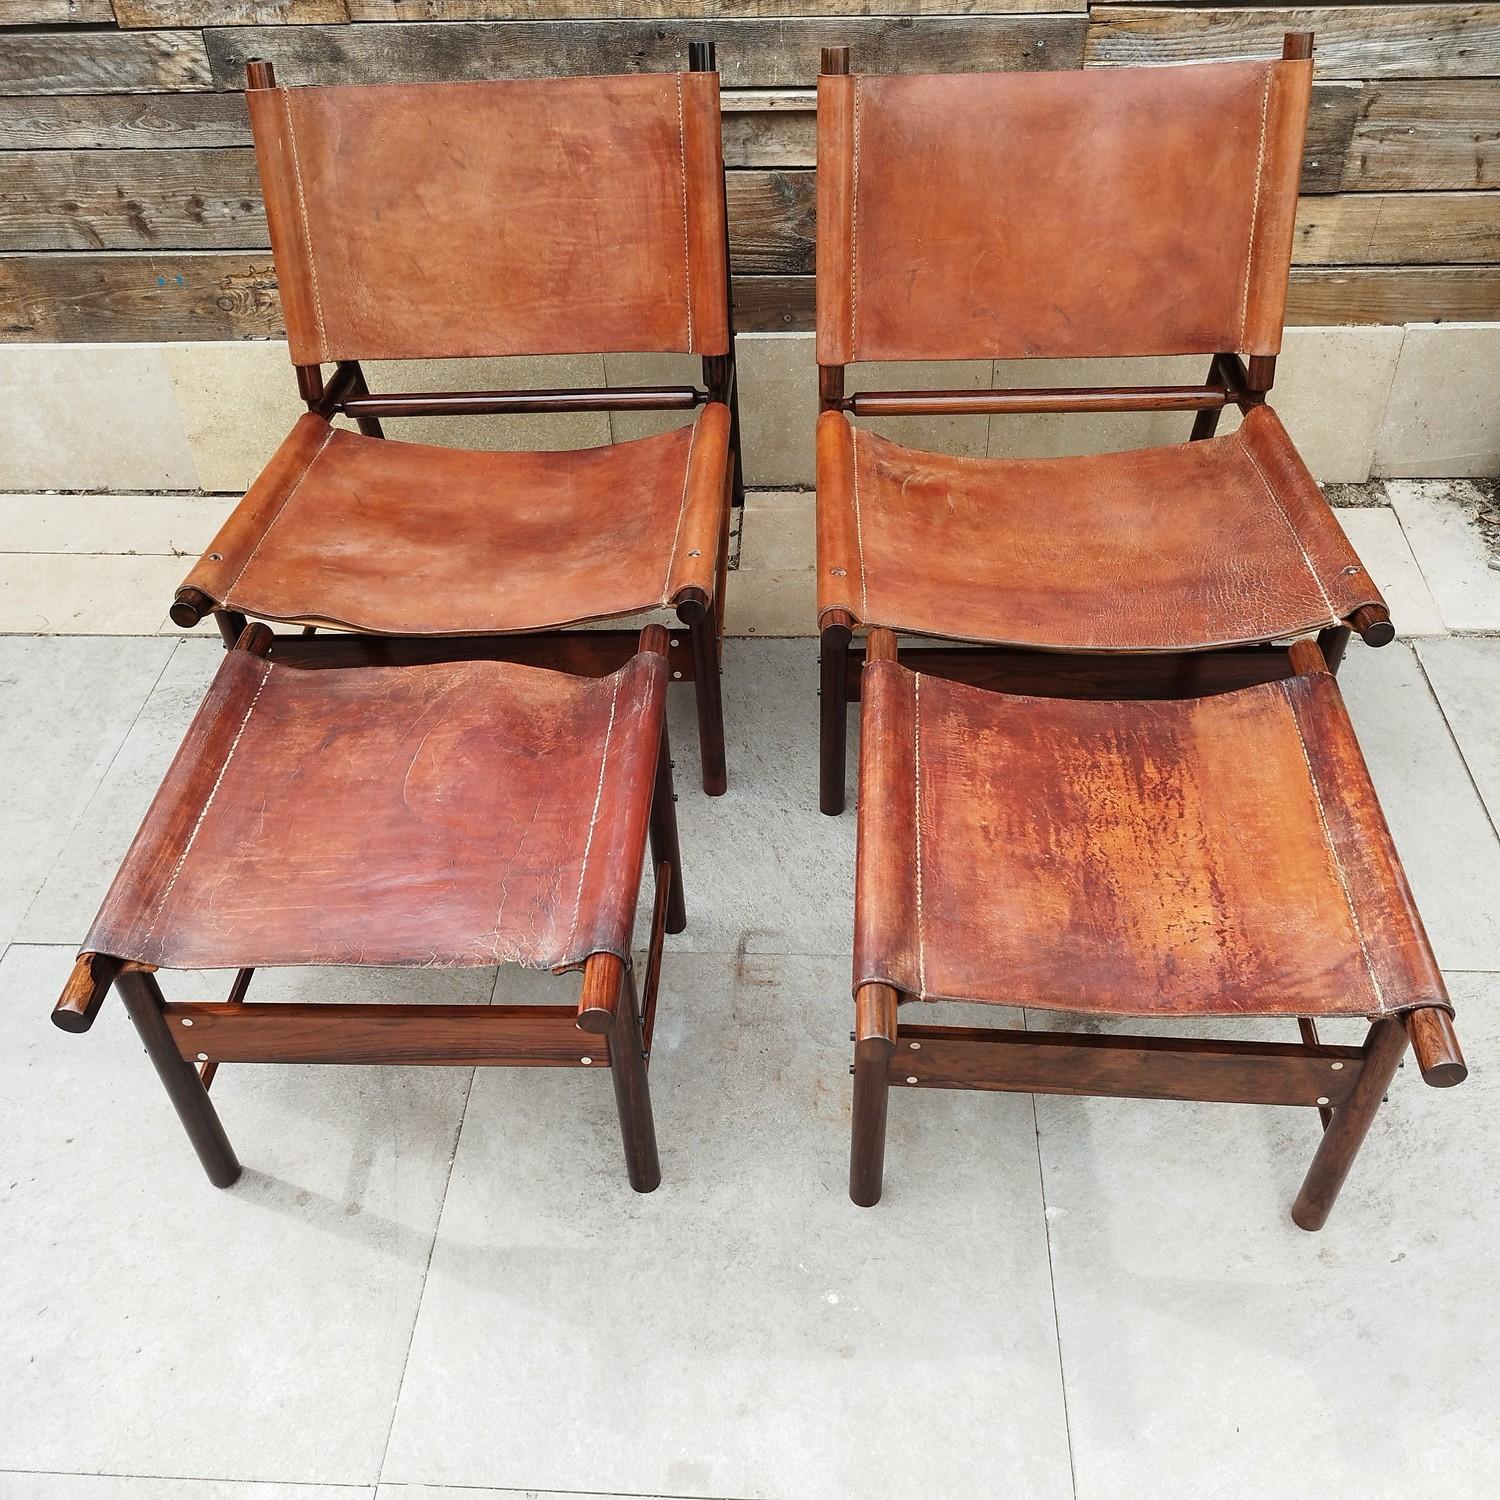 Rare pair of armchairs and ottomans by Jorge Zalszupin, Brazil, 1960's. Zalszupin, a native Polish, first became an architect in Paris, before immigrating to Brazil in 1949 influenced by the works of Oscar Niemeyer.
The armchairs and ottomans are in